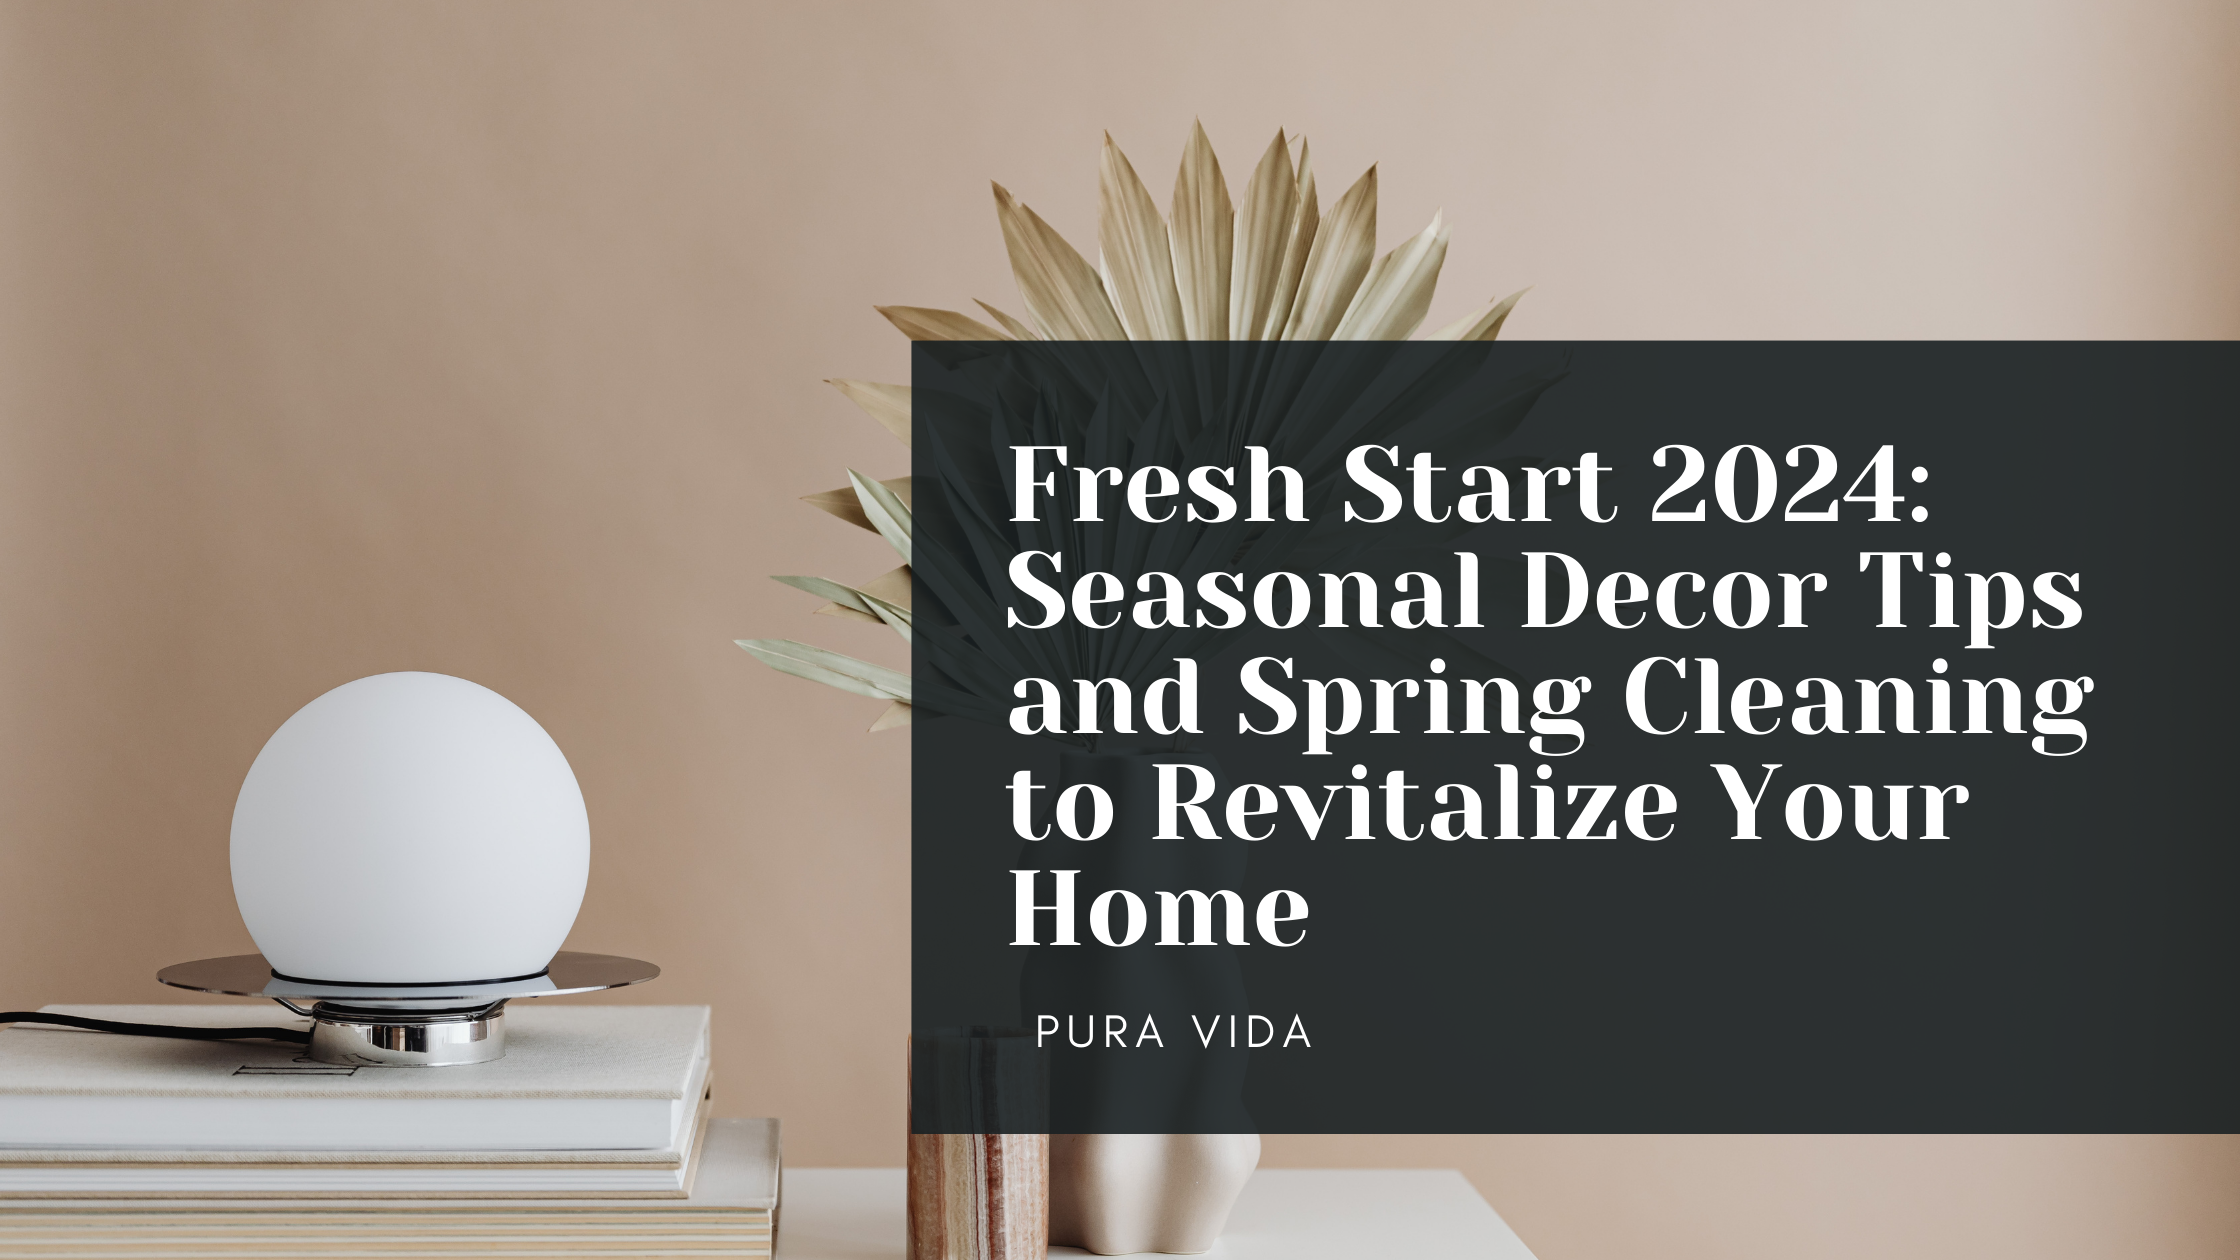 Fresh Start 2024: Seasonal Decor Tips and Spring Cleaning to Revitalize Your Home